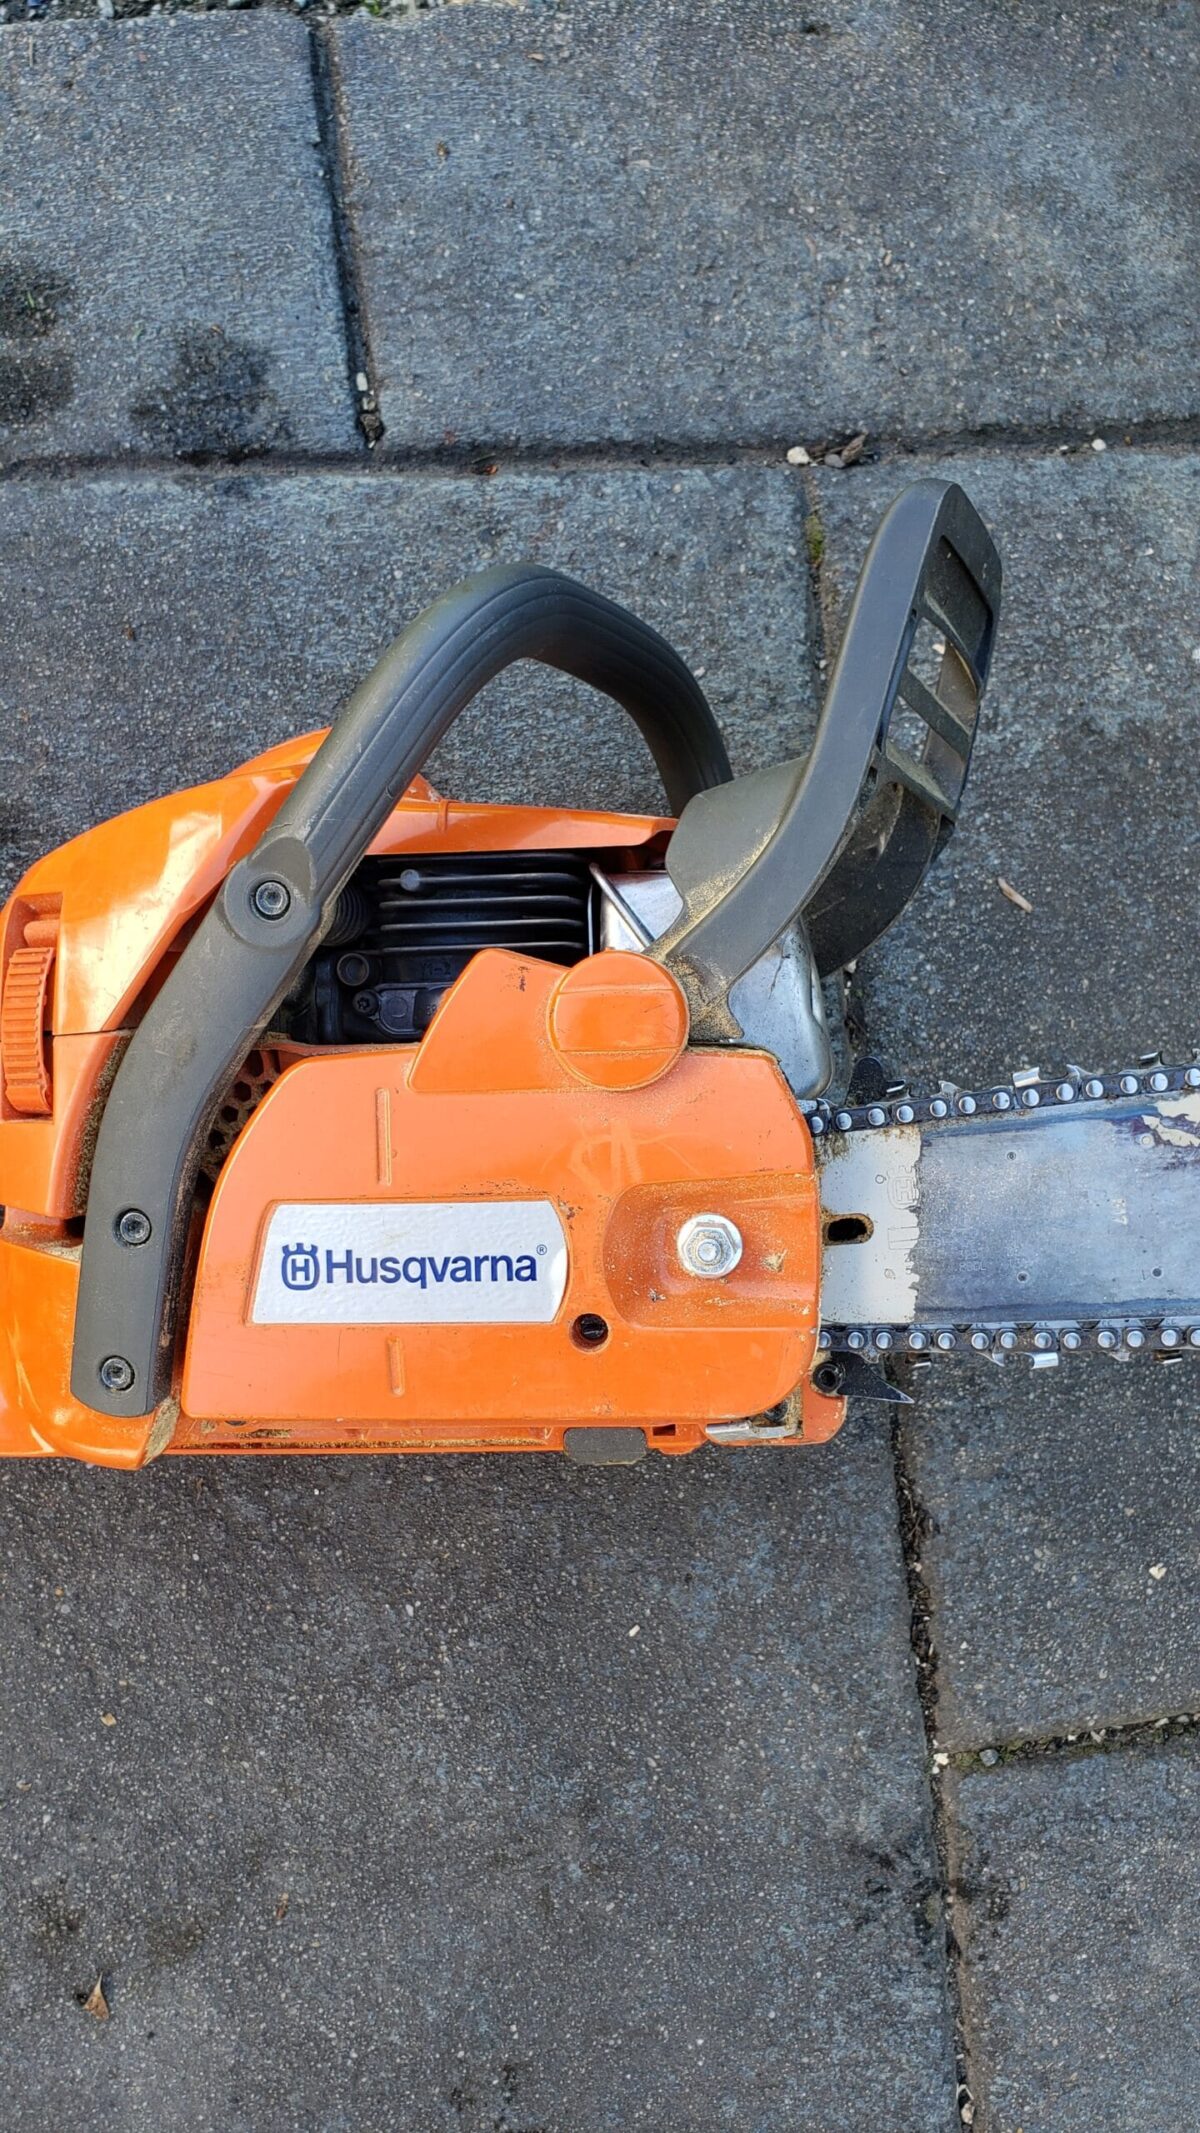 which way does a chain go on a chainsaw